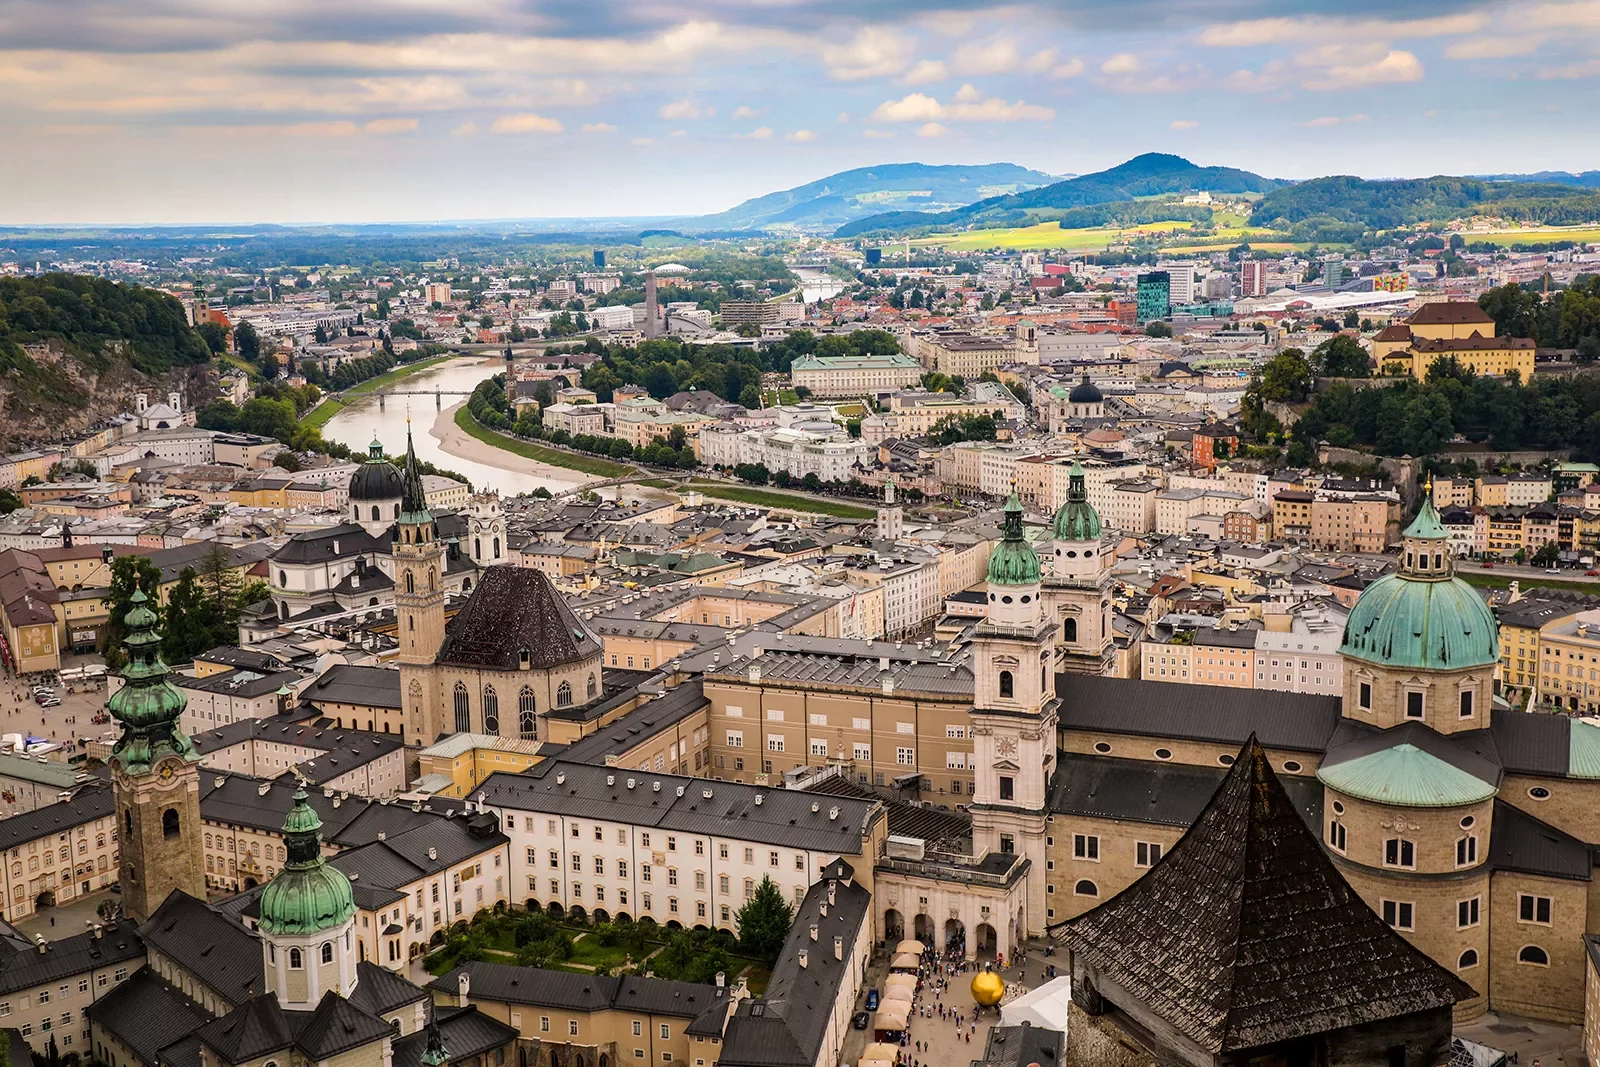 Aerial view of a city in Austria.